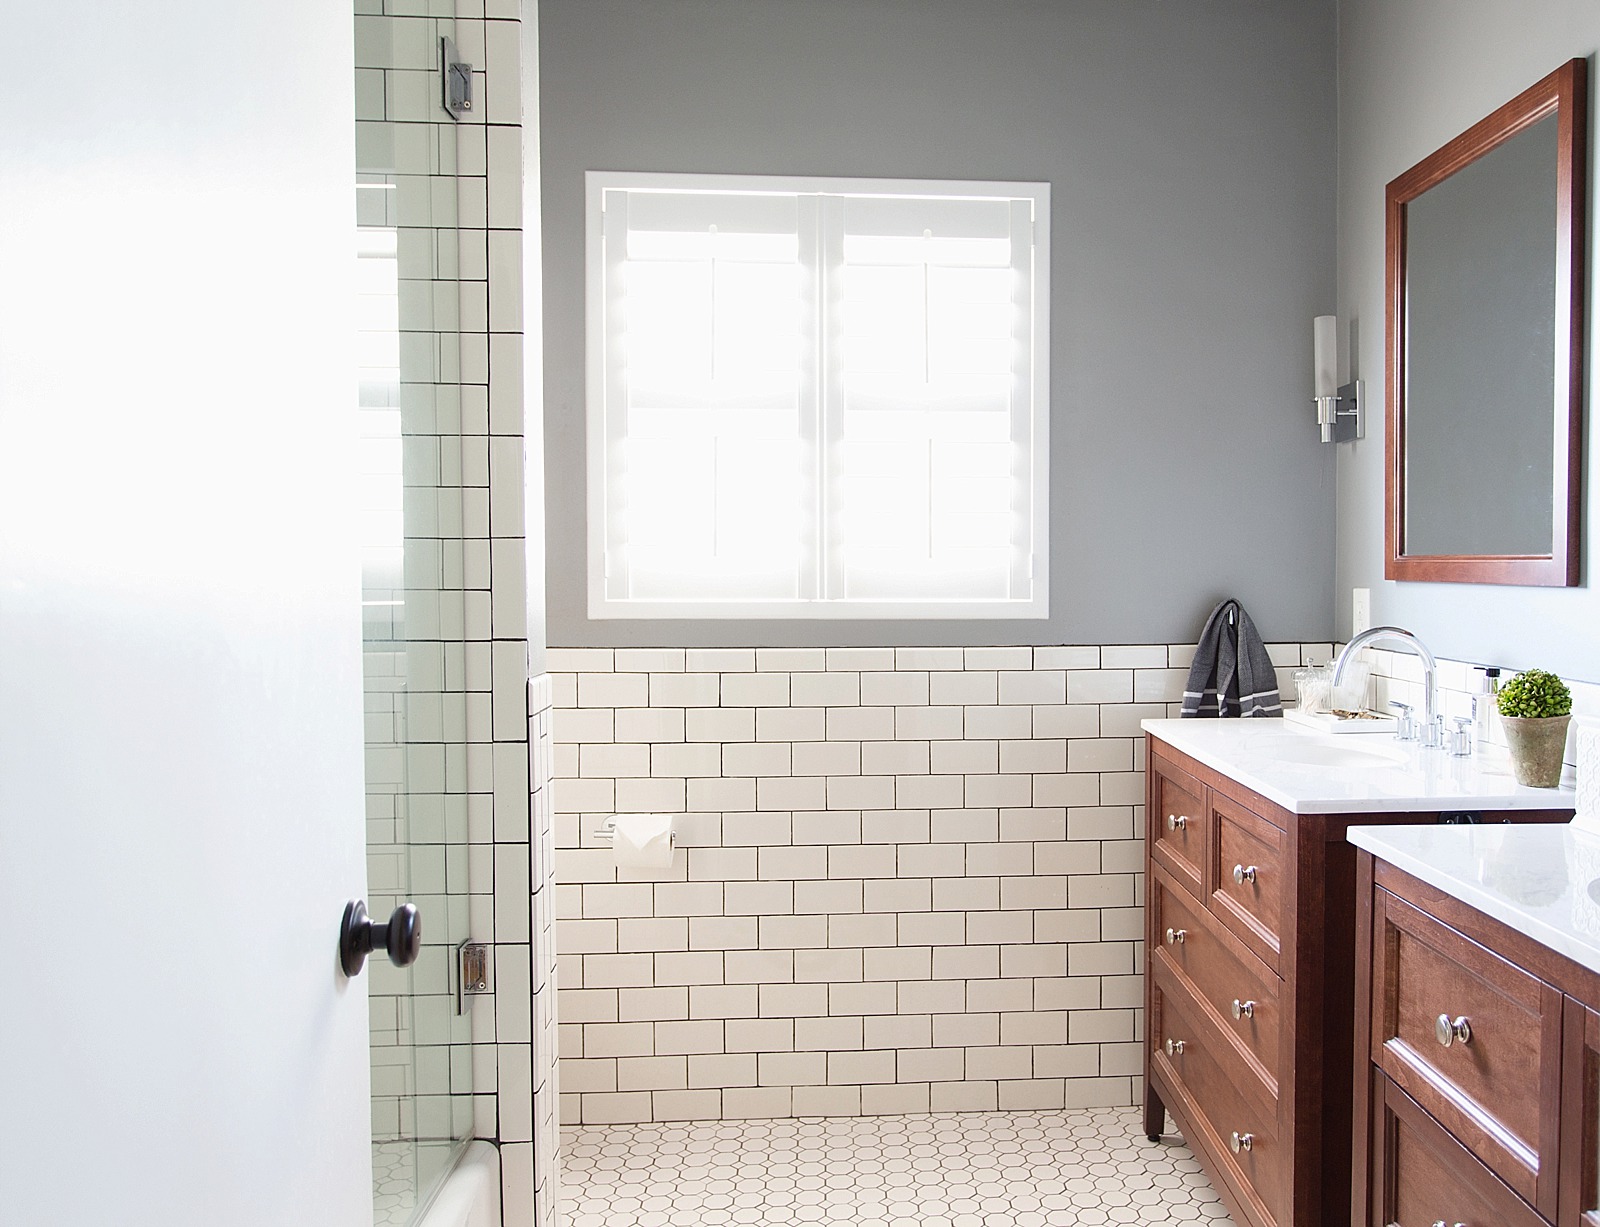 white subway tile with dark black grout bathroom jonathan adler touches zebra rug and bathroom refresh home tour belonging to diana elizabeth, lifestyle blogger